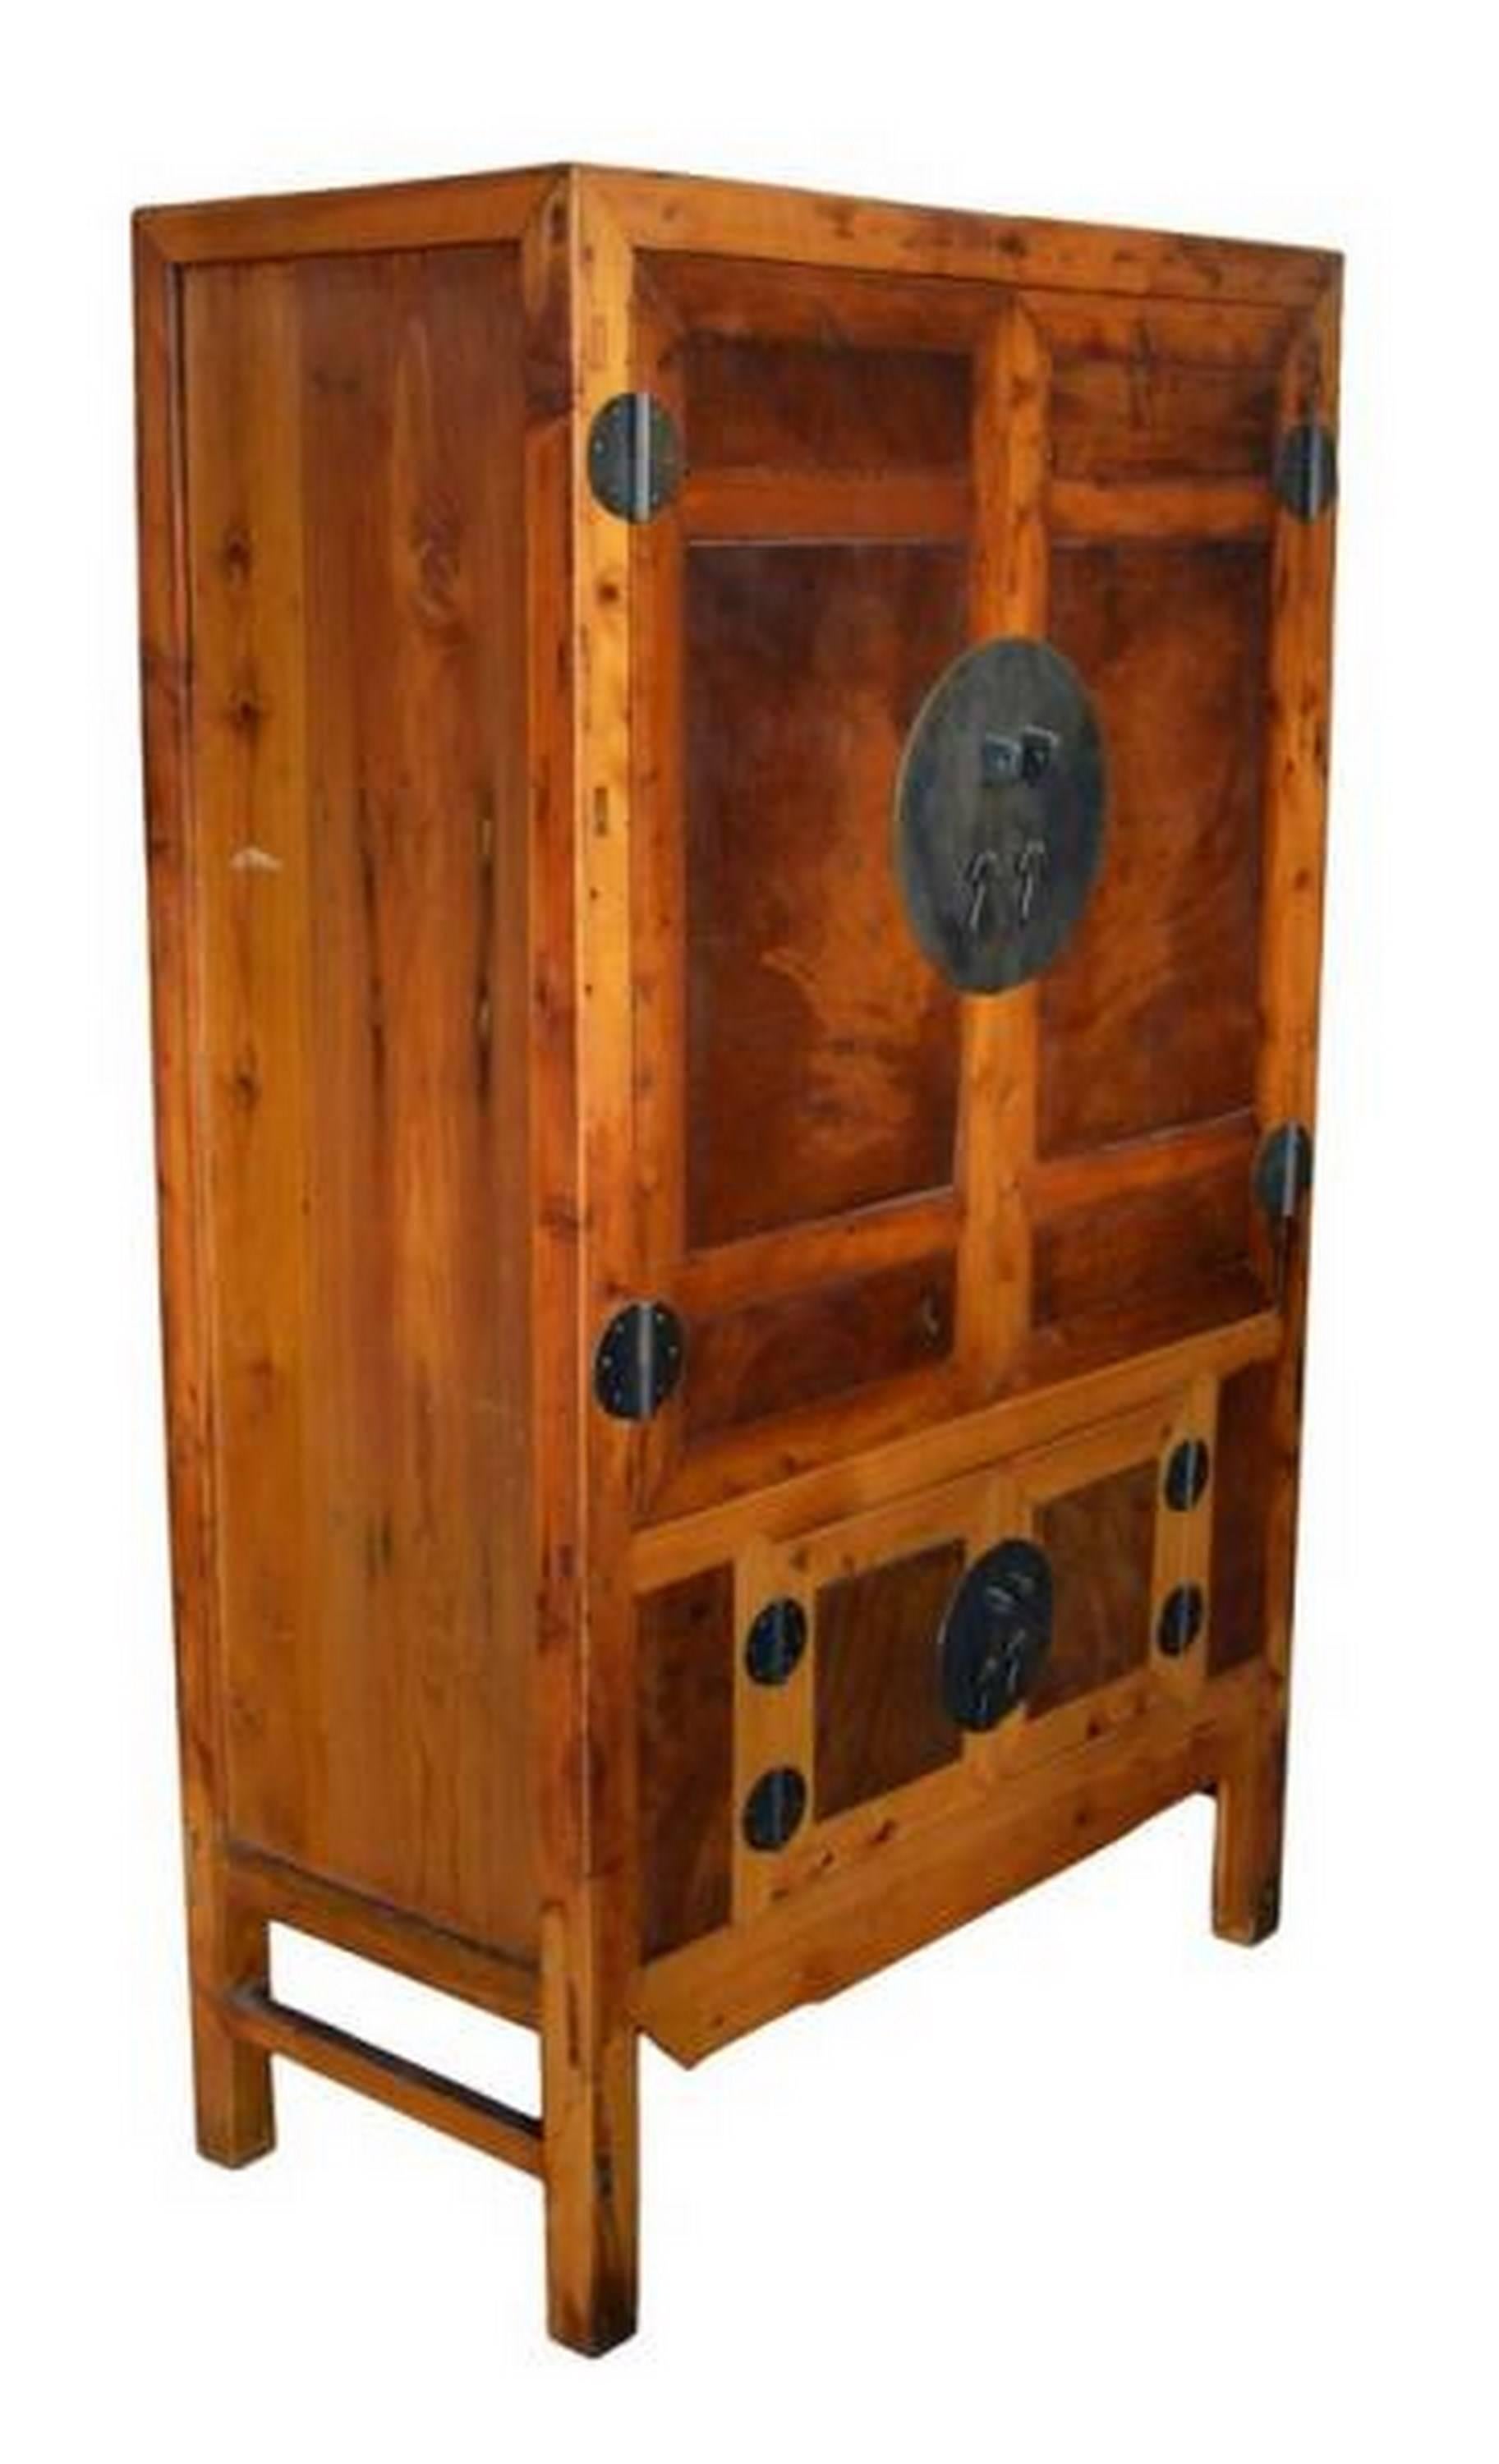 An antique armoire with burl wood panels and original brass hardware from 19th century China. This Chinese antique armoire was made with inset burl wood panels and brass hardware. The armoire adopts a traditional Chinese shape with a rectangular